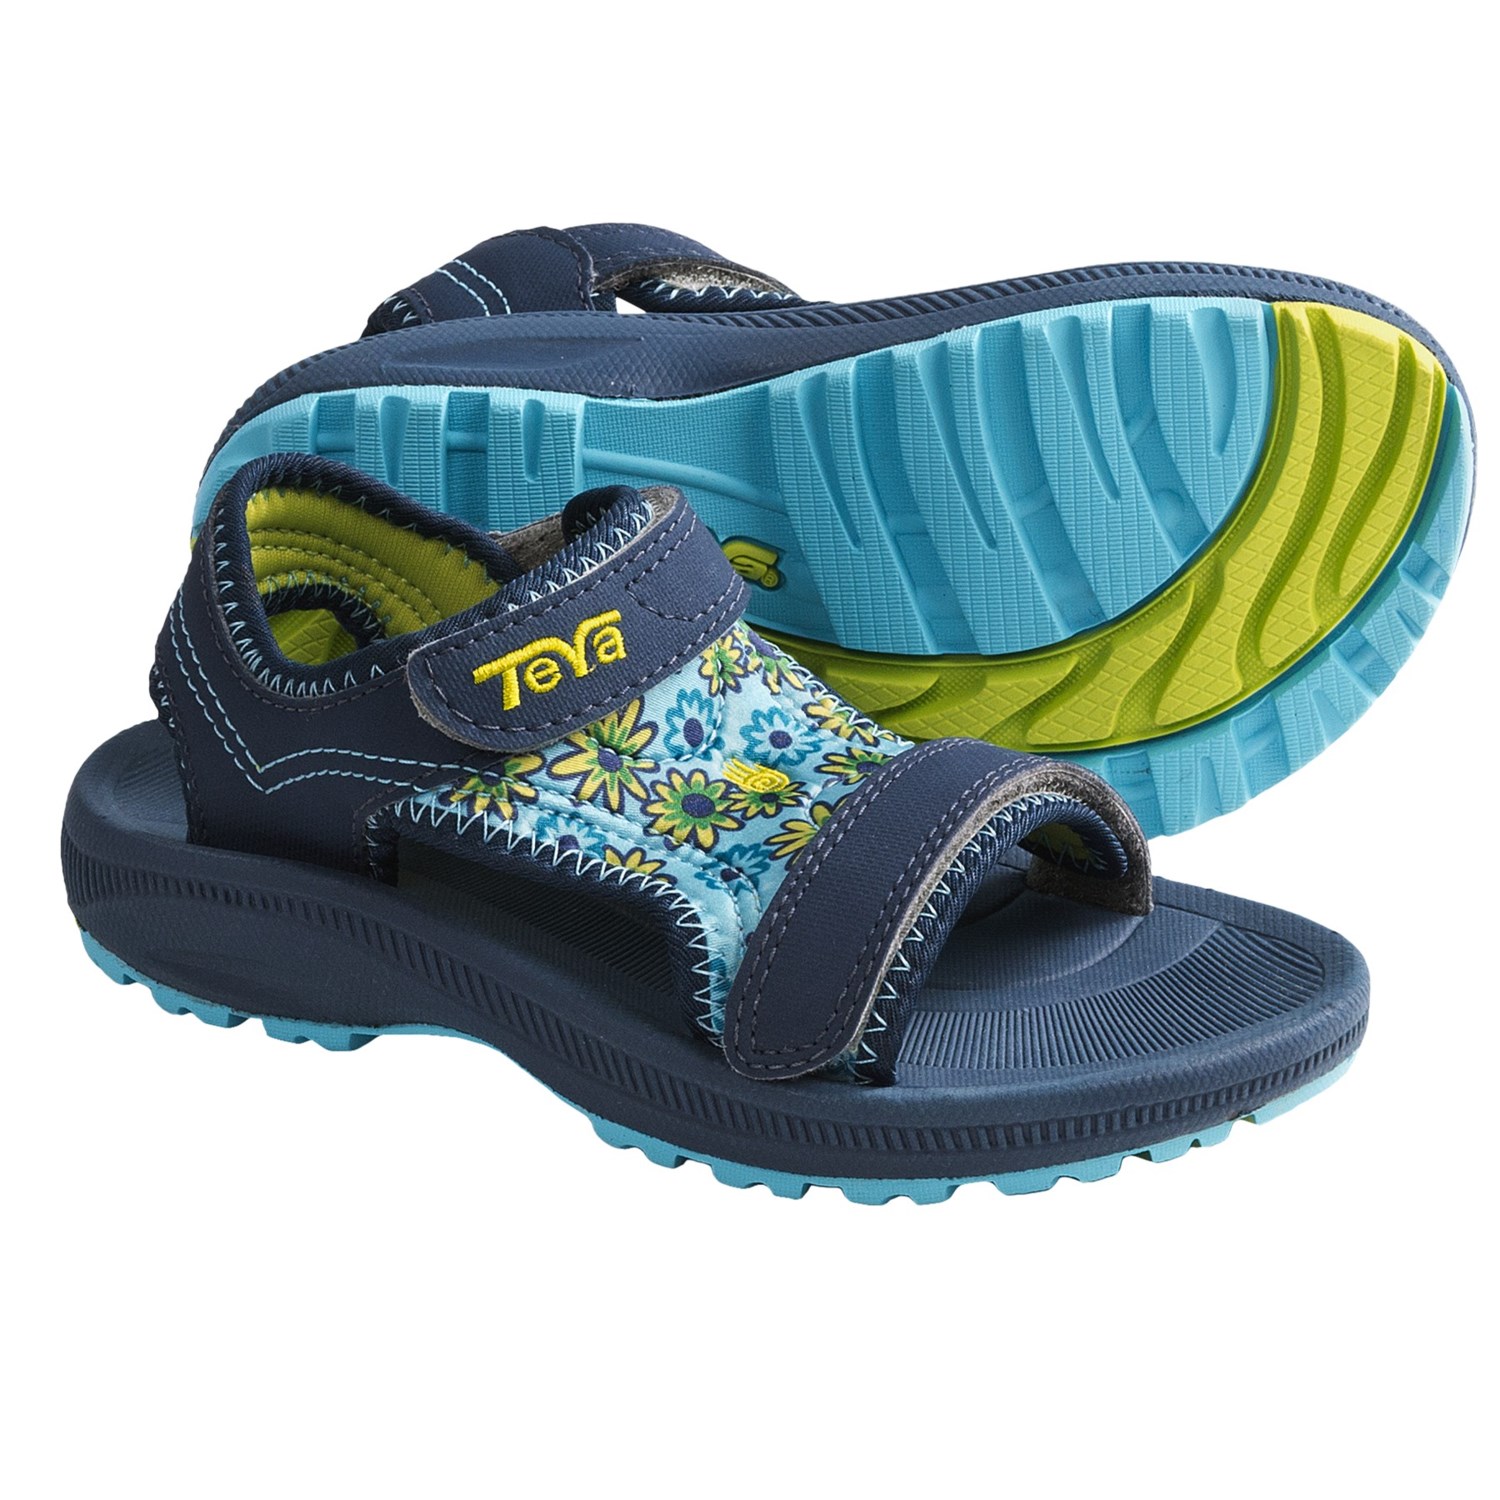 Teva Psyclone 2 Print Sport Sandals (For Kids and Youth) in Daisy Blue